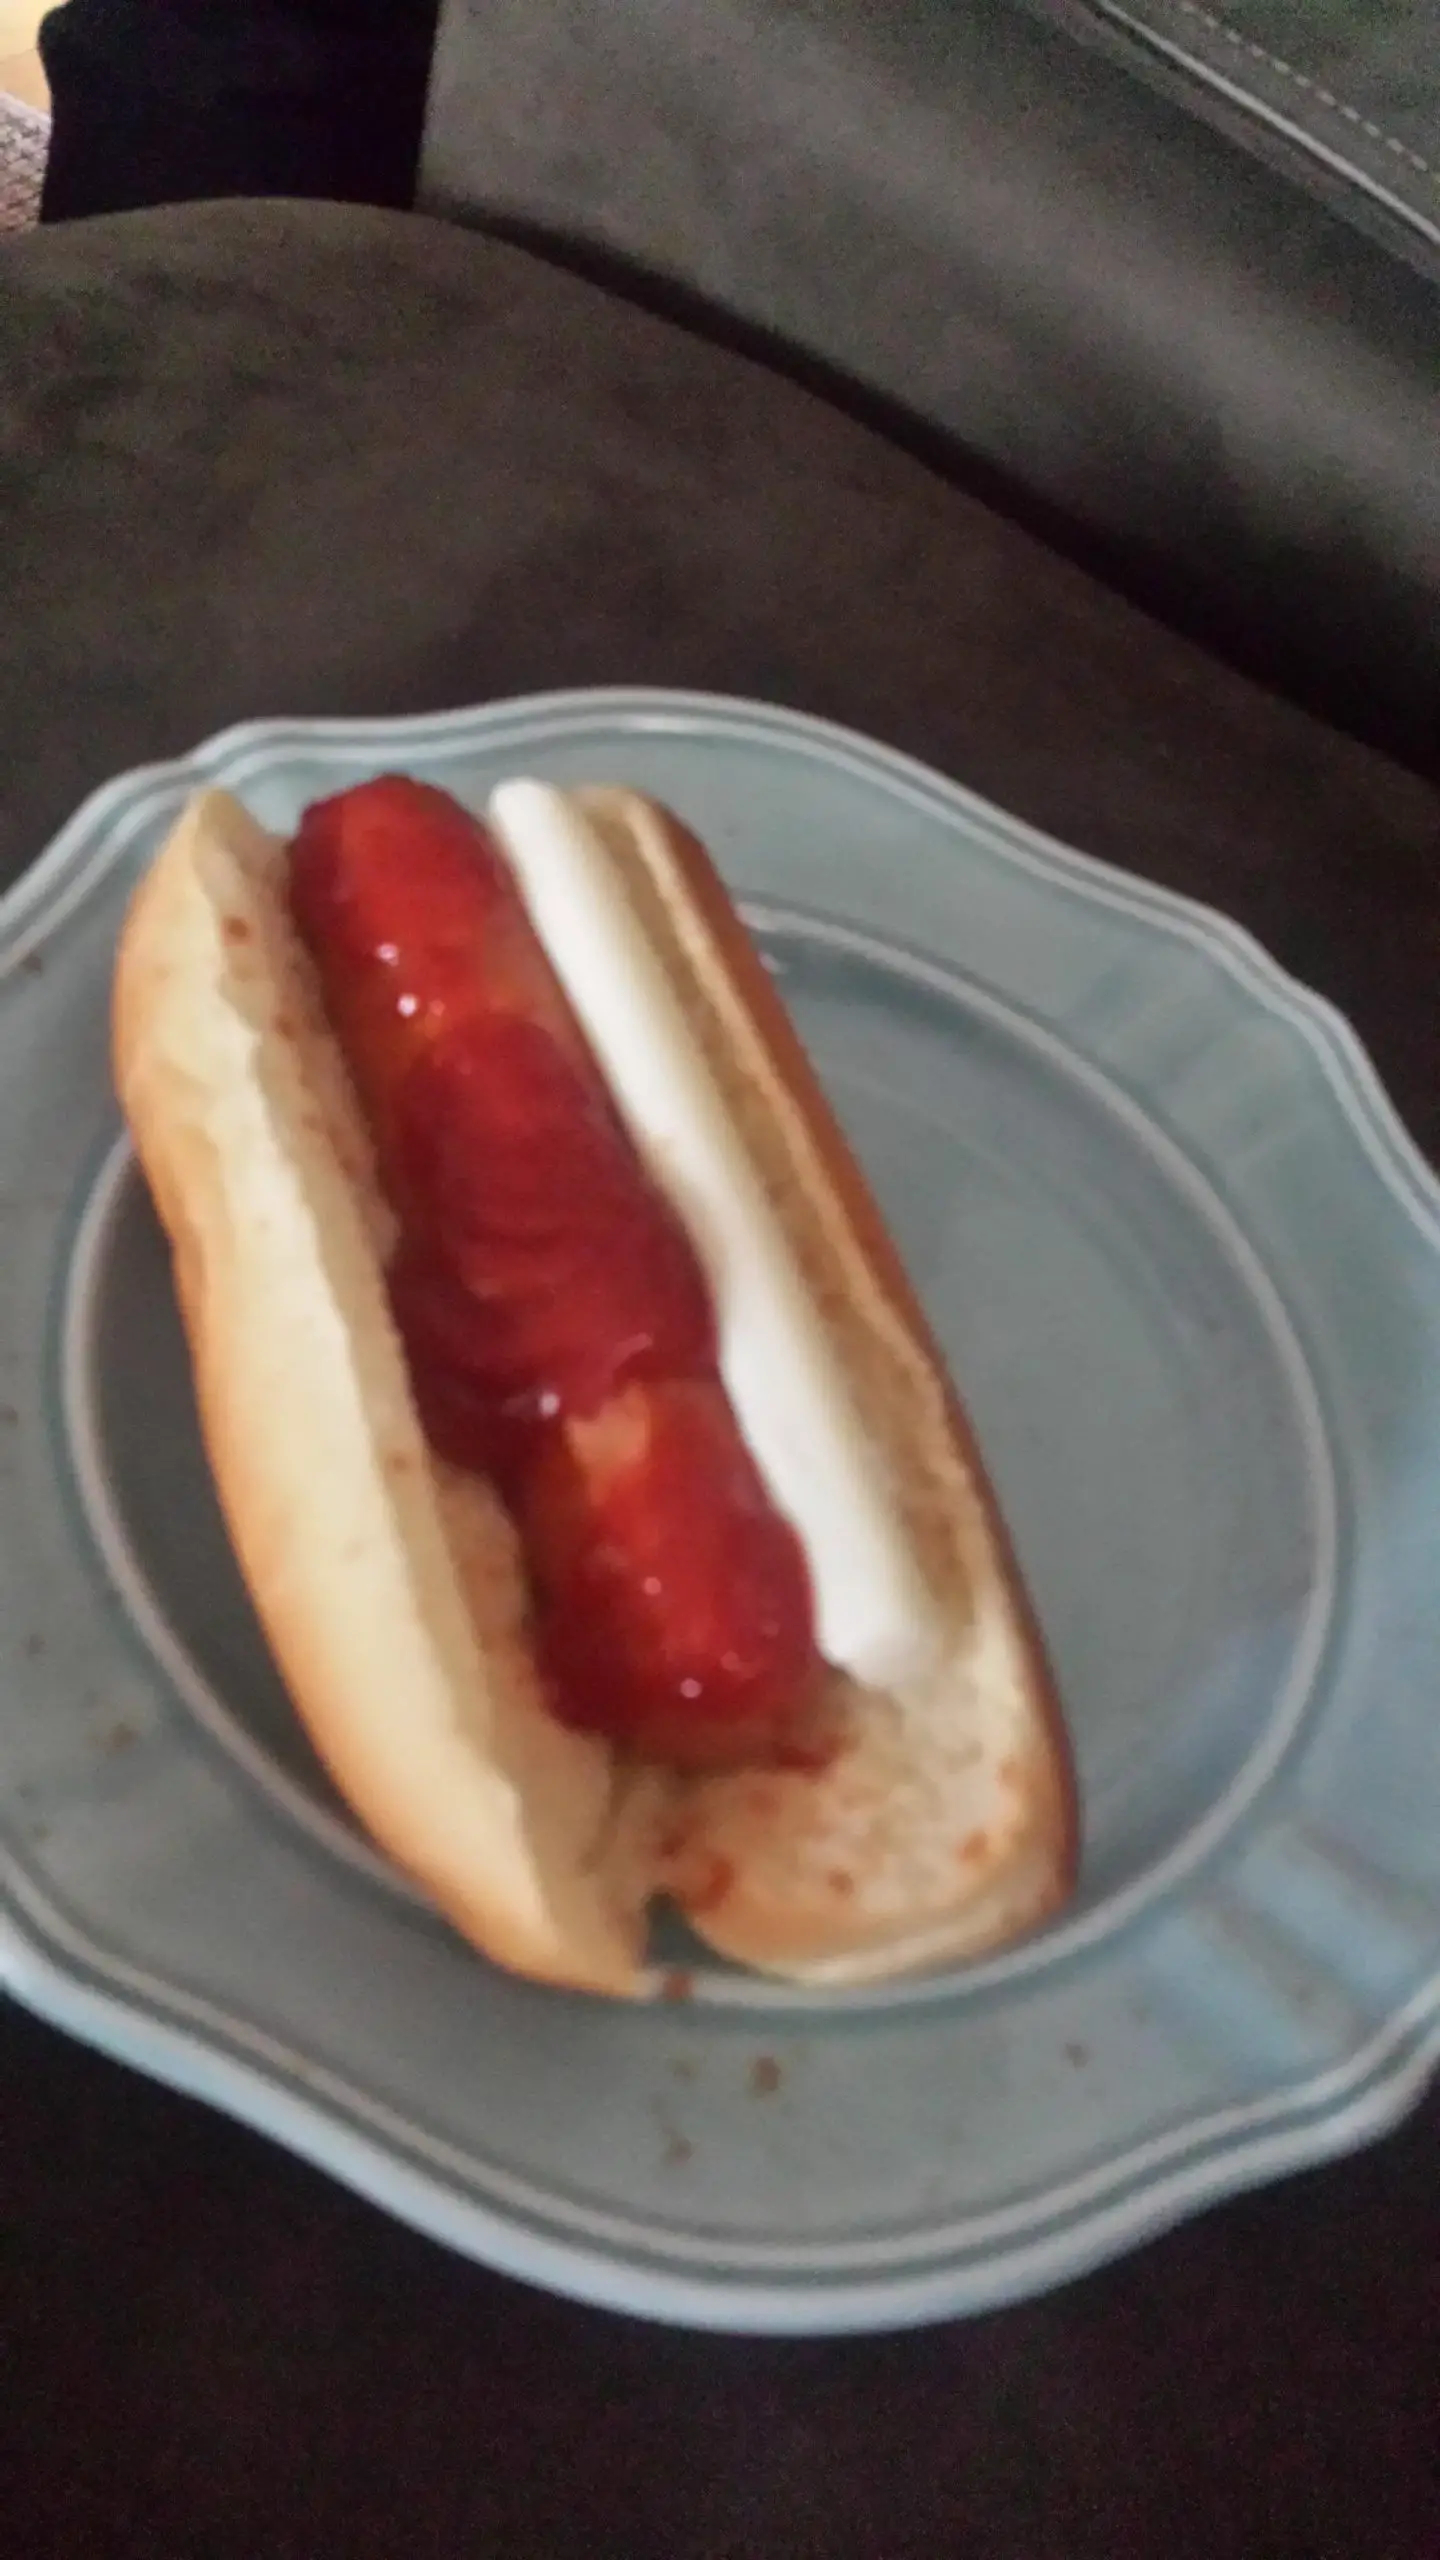 Roomate made a cheese dog with string cheese : shittyfoodporn